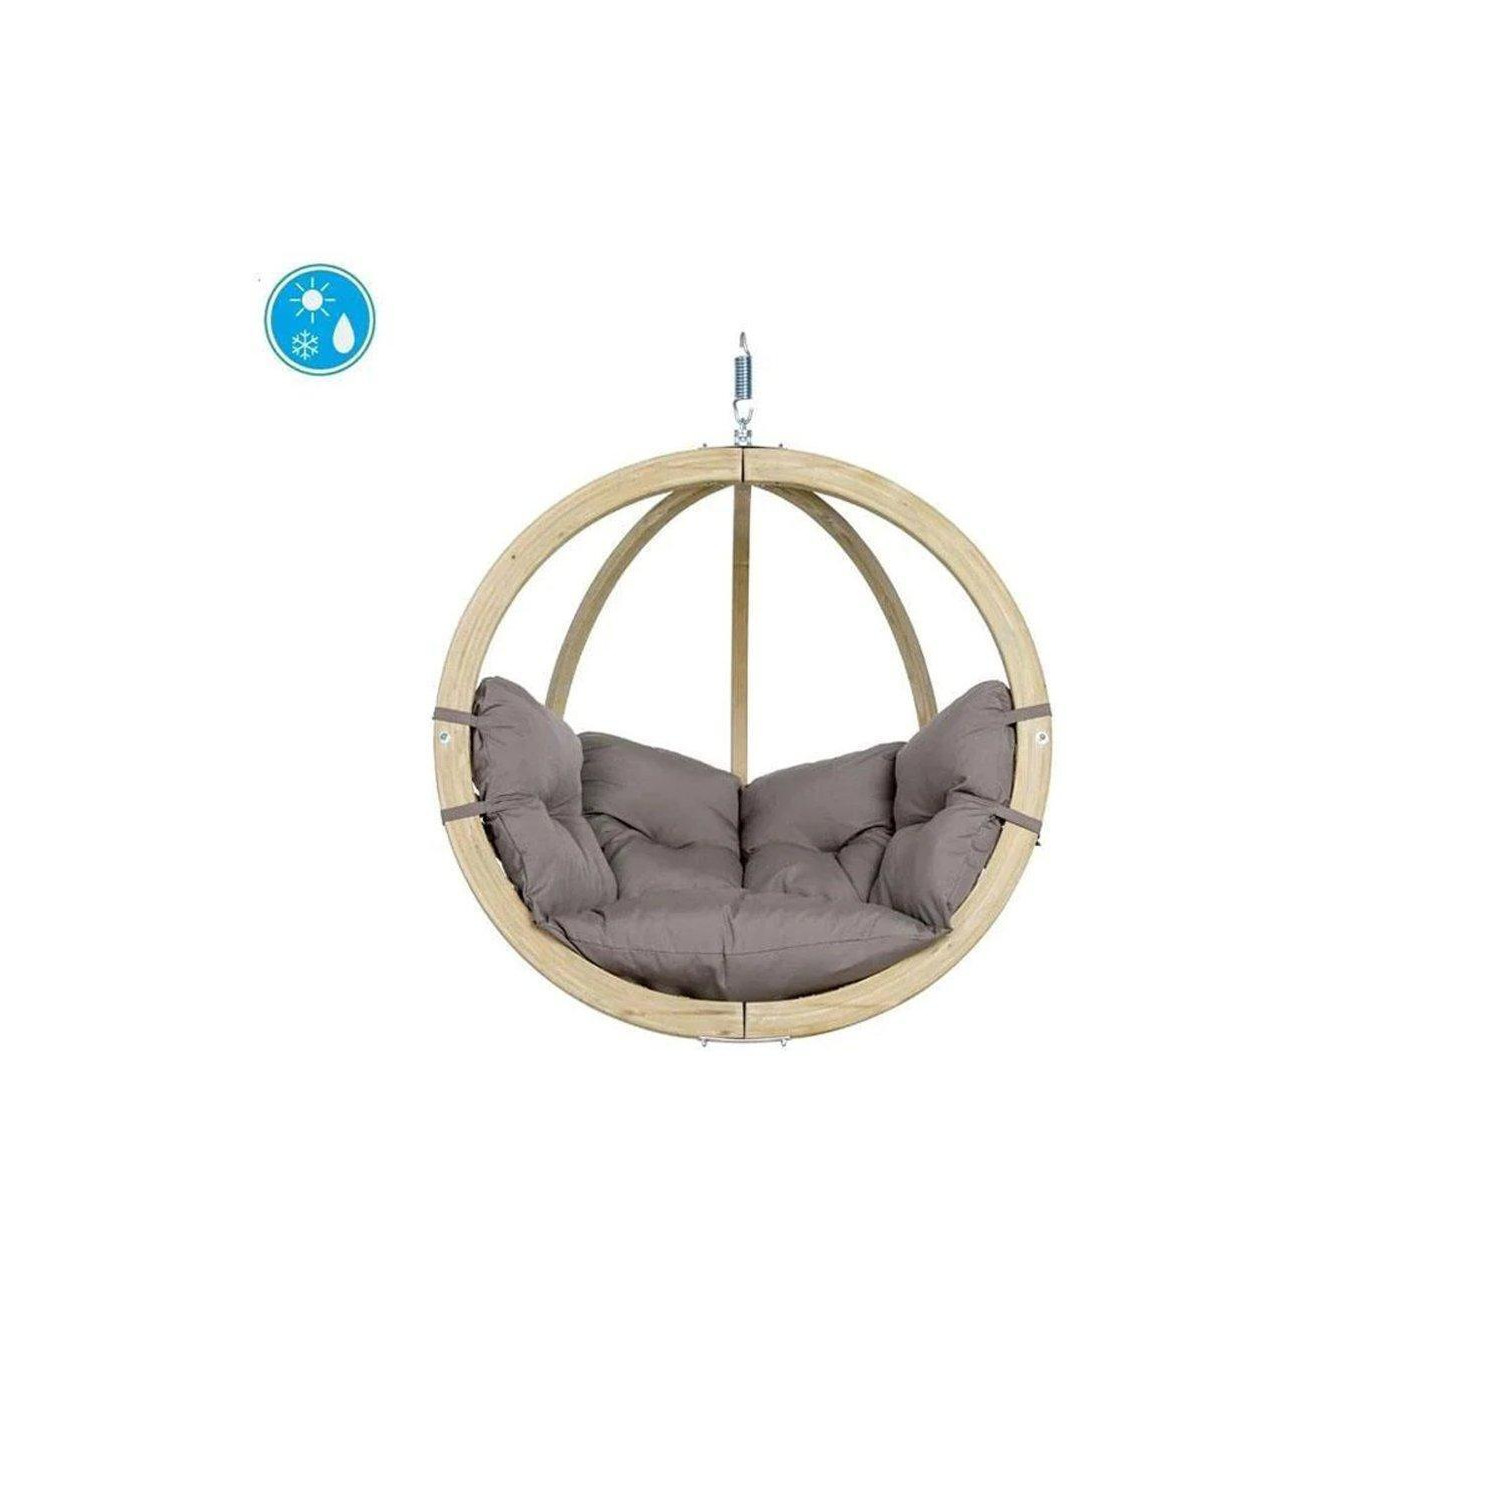 Globo Single Wooden Cushion Egg Hanging Chair - Taupe - image 1